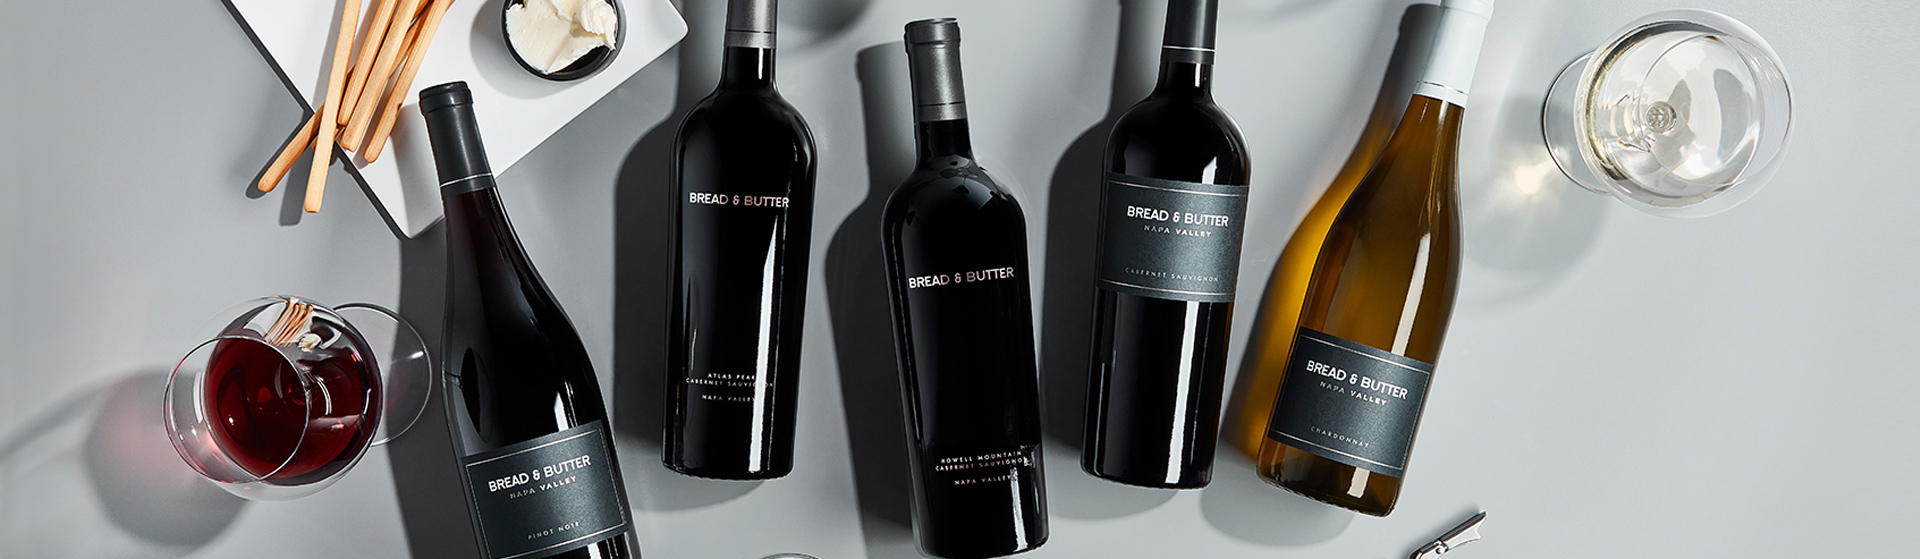 Bread & Butter Shop All Wines Header Image featuring Napa Valley and Cellar Collection Wines. From left to right: Napa Valley Pinot Noir, Atlas Peak Cabernet Sauvignon, Howell Mountain Cabernet Sauvignon, Napa Valley Cabernet Sauvignon, and Napa Valley Chardonnay.